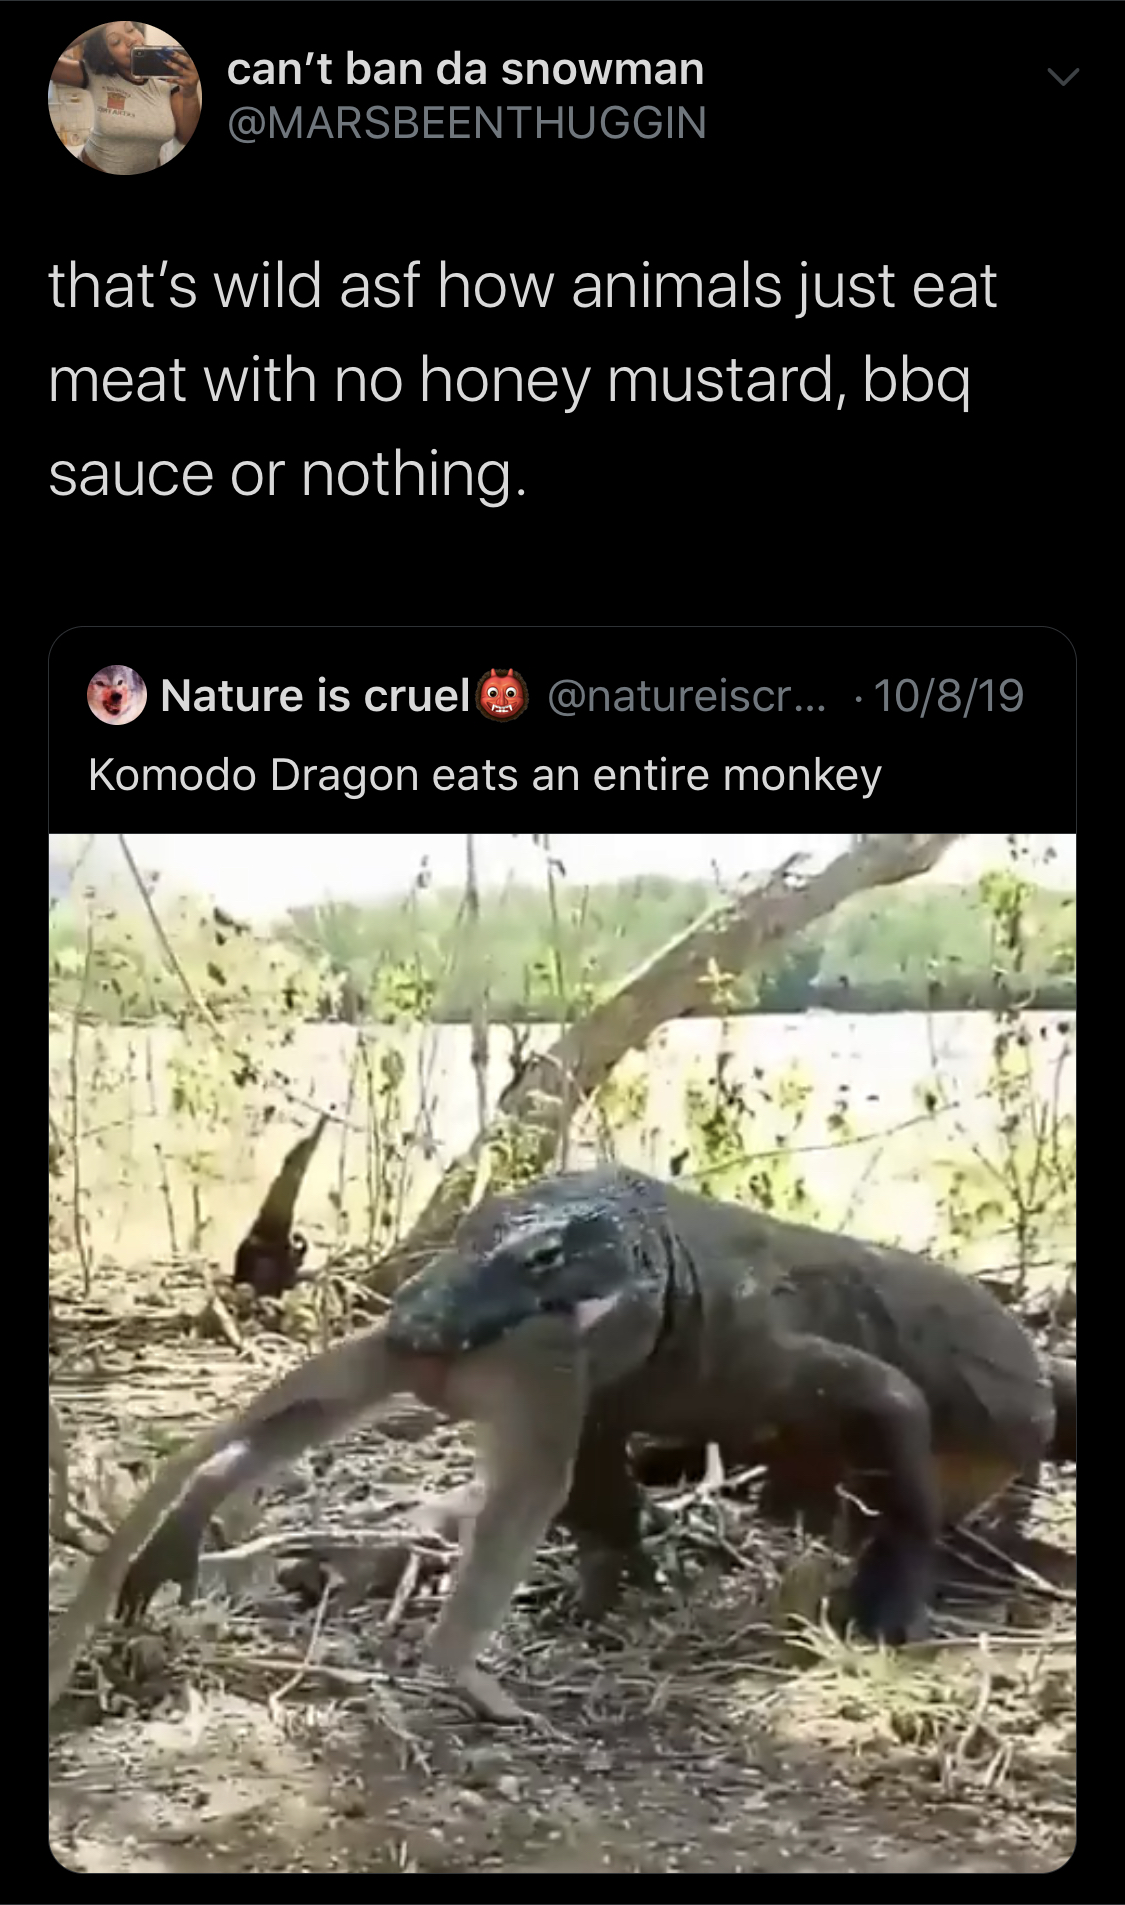 dinosaur - can't ban da snowman that's wild asf how animals just eat meat with no honey mustard, bbq sauce or nothing. Nature is cruel ... 10819 Komodo Dragon eats an entire monkey